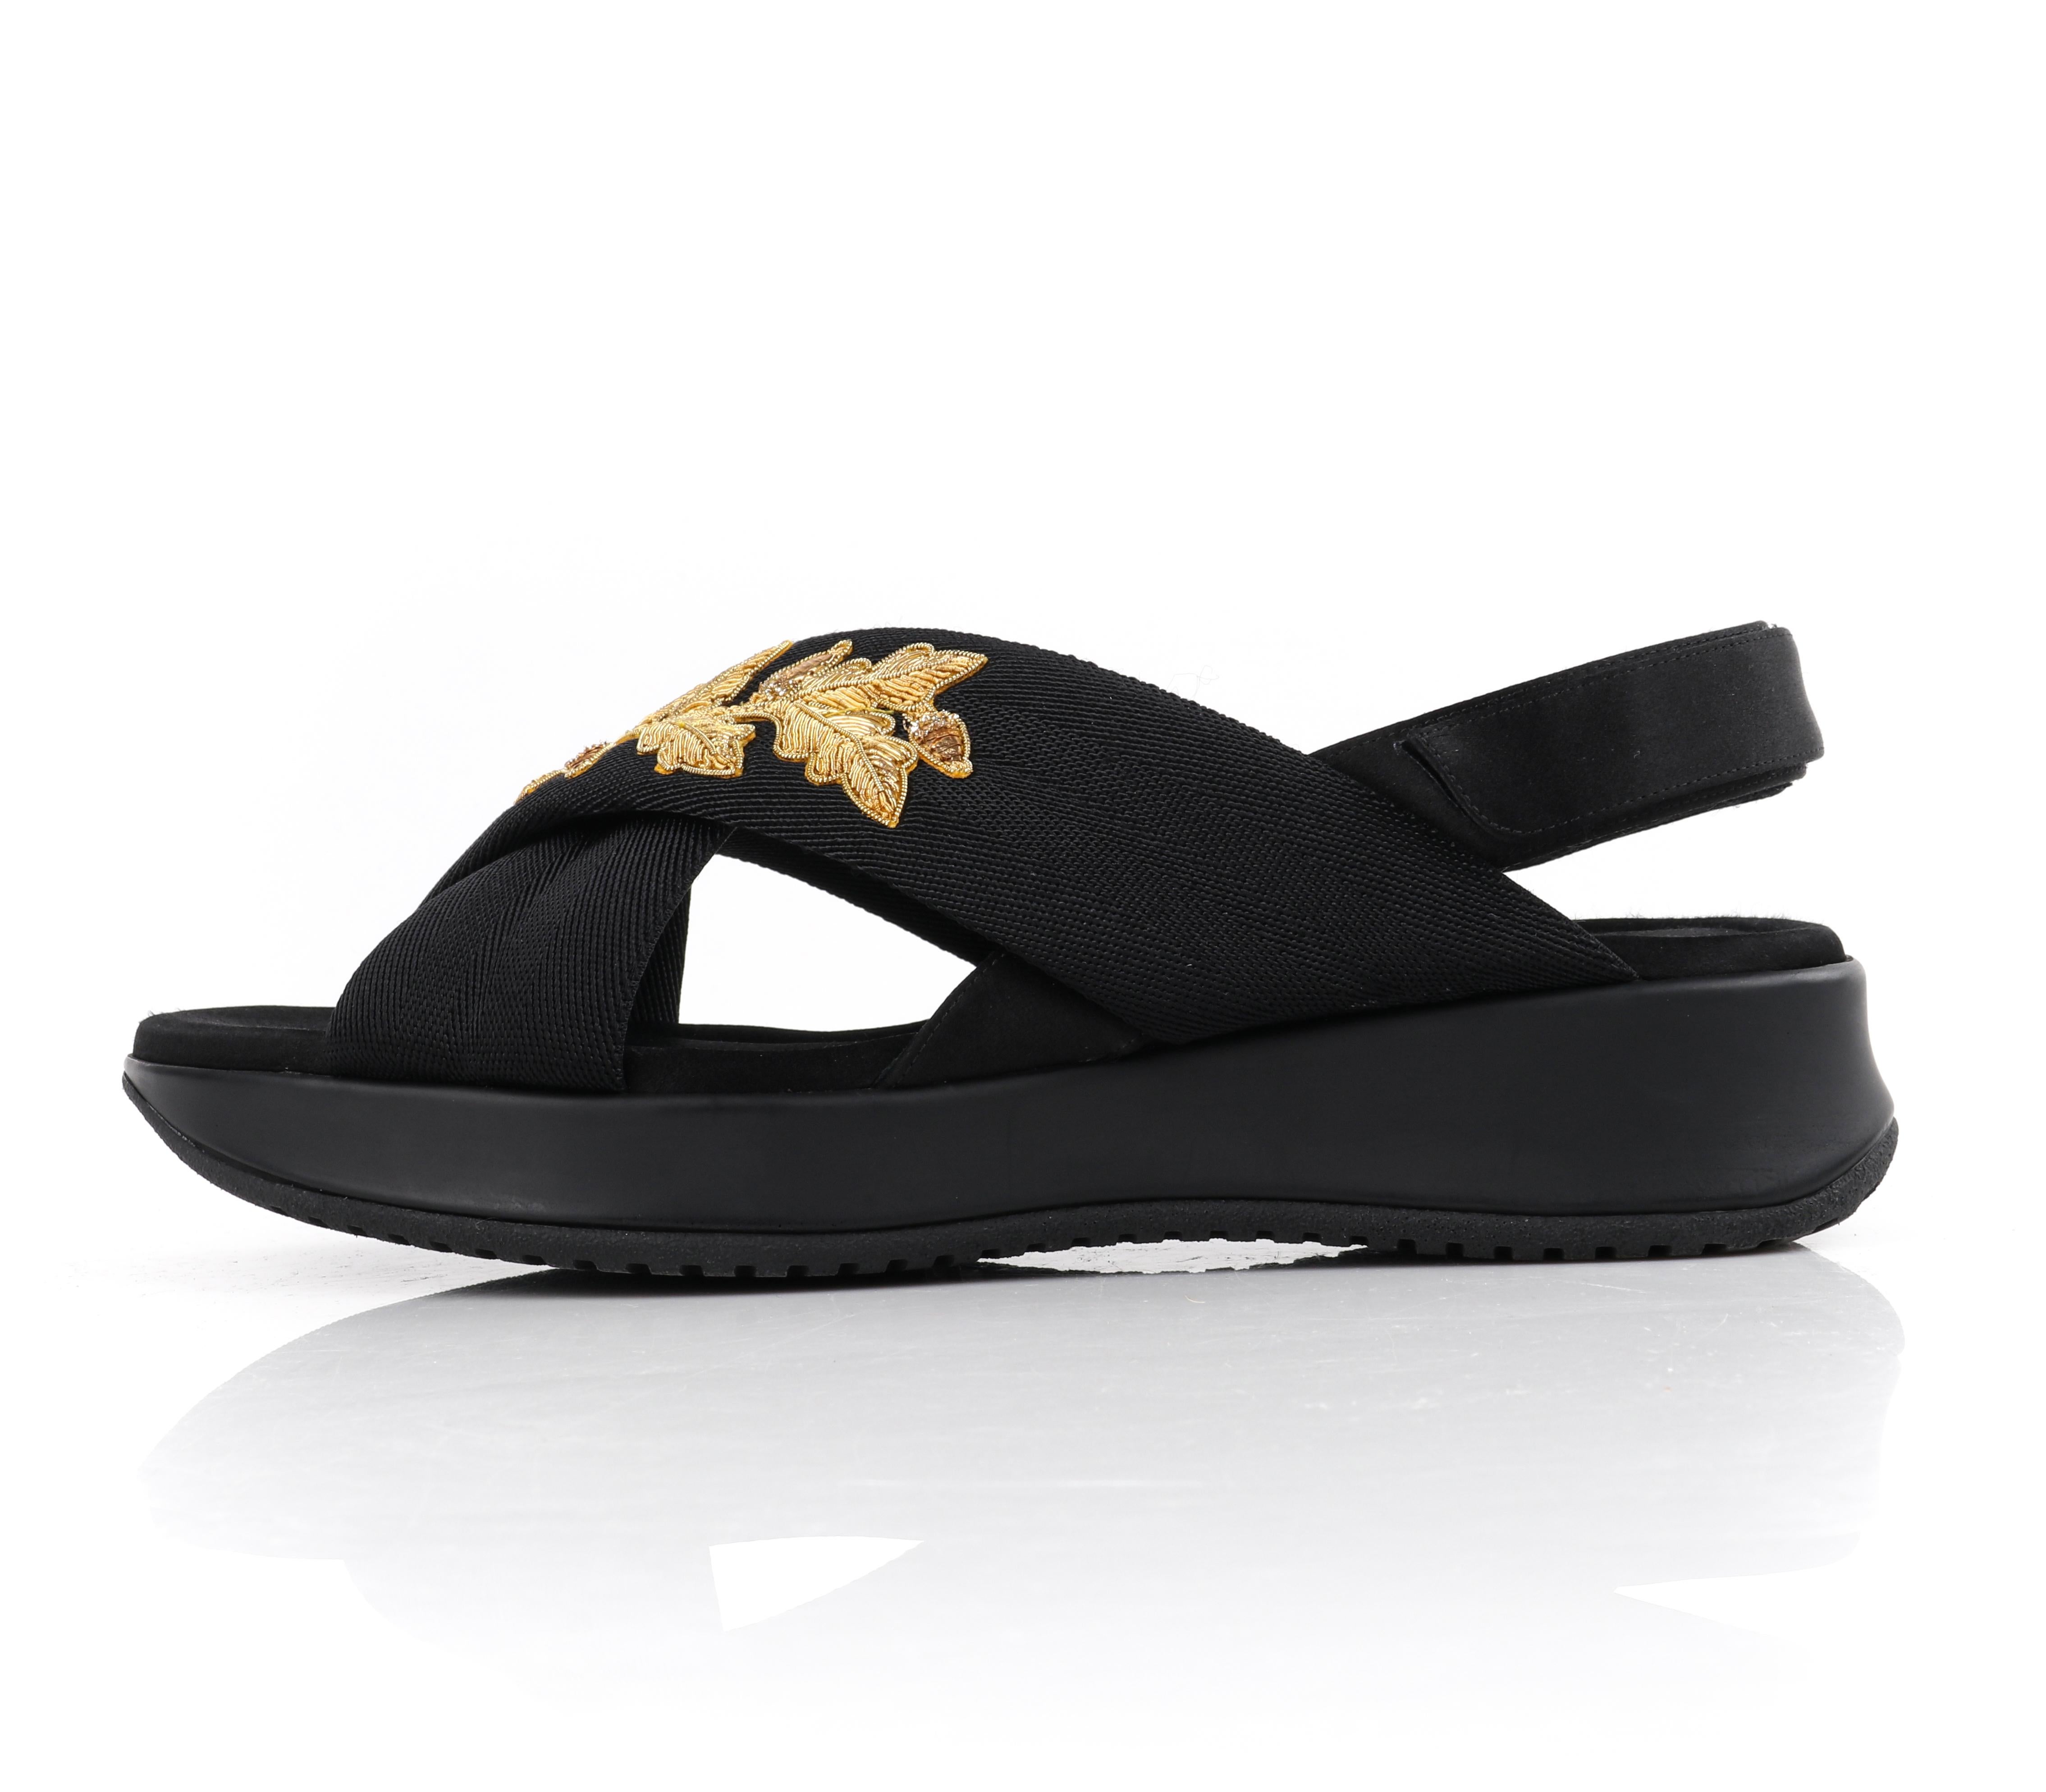 Women's BURBERRY Prorsum S/S 2016 Criss Cross Embroidered Black Gold Adjustable Sandals  For Sale